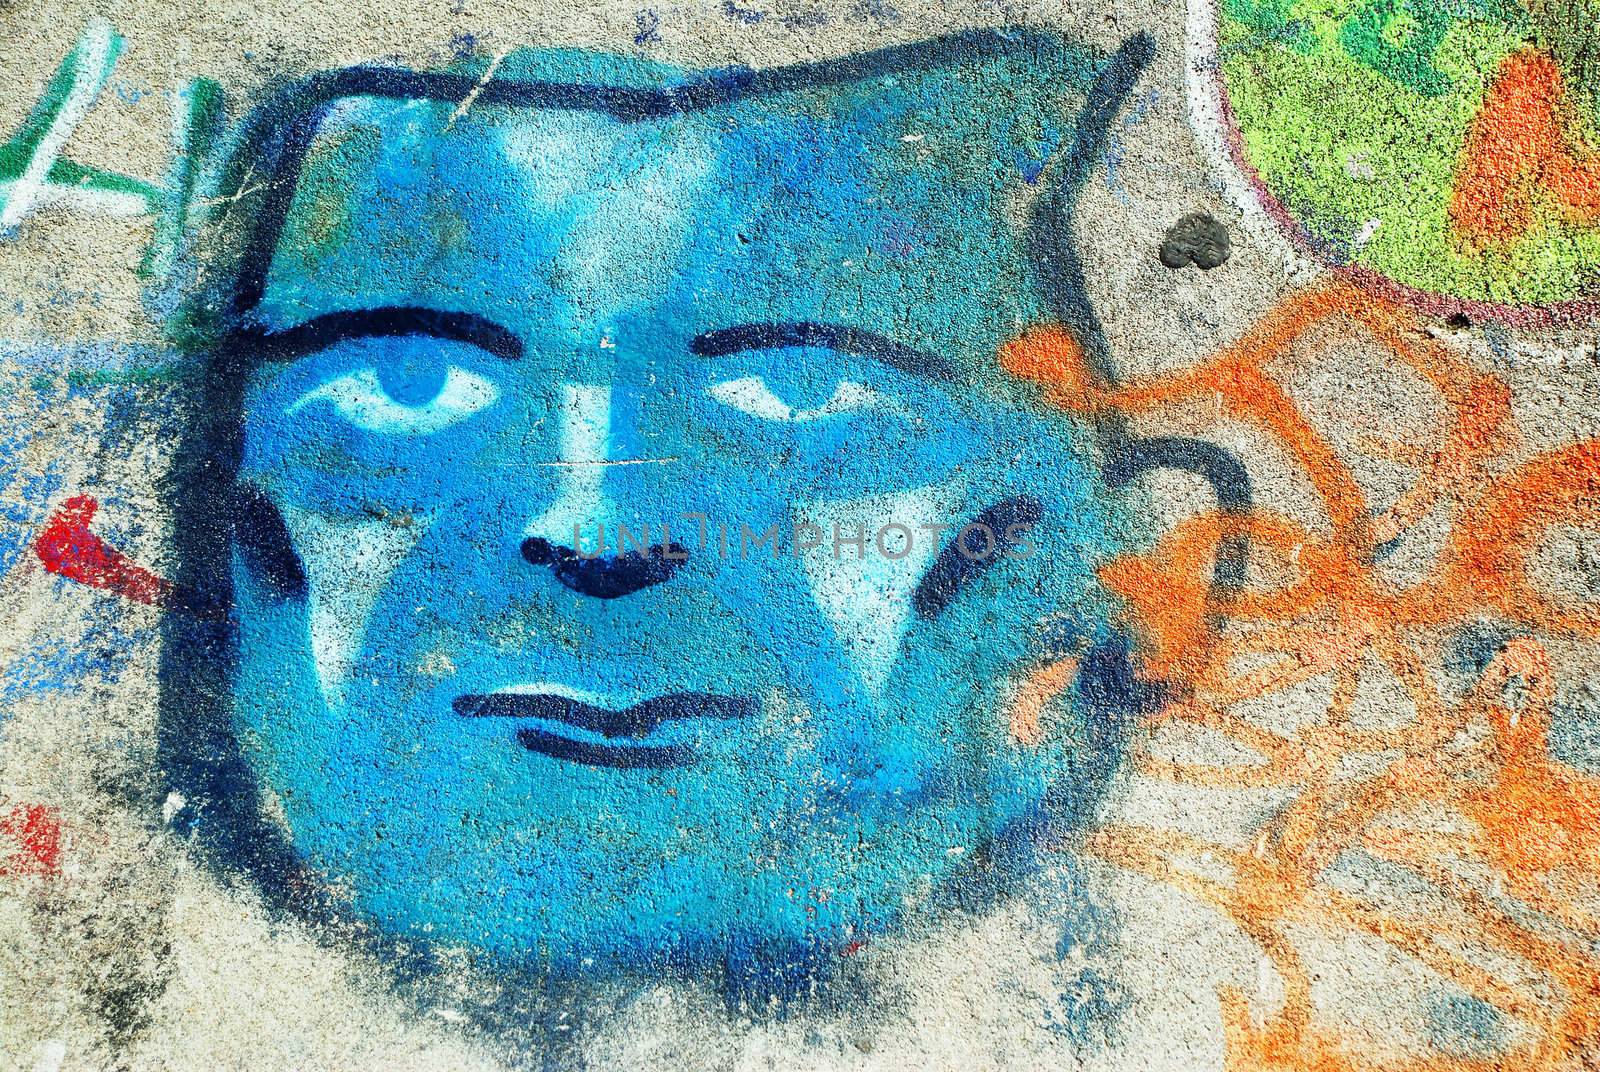 Blue Face Graffiti by pwillitts